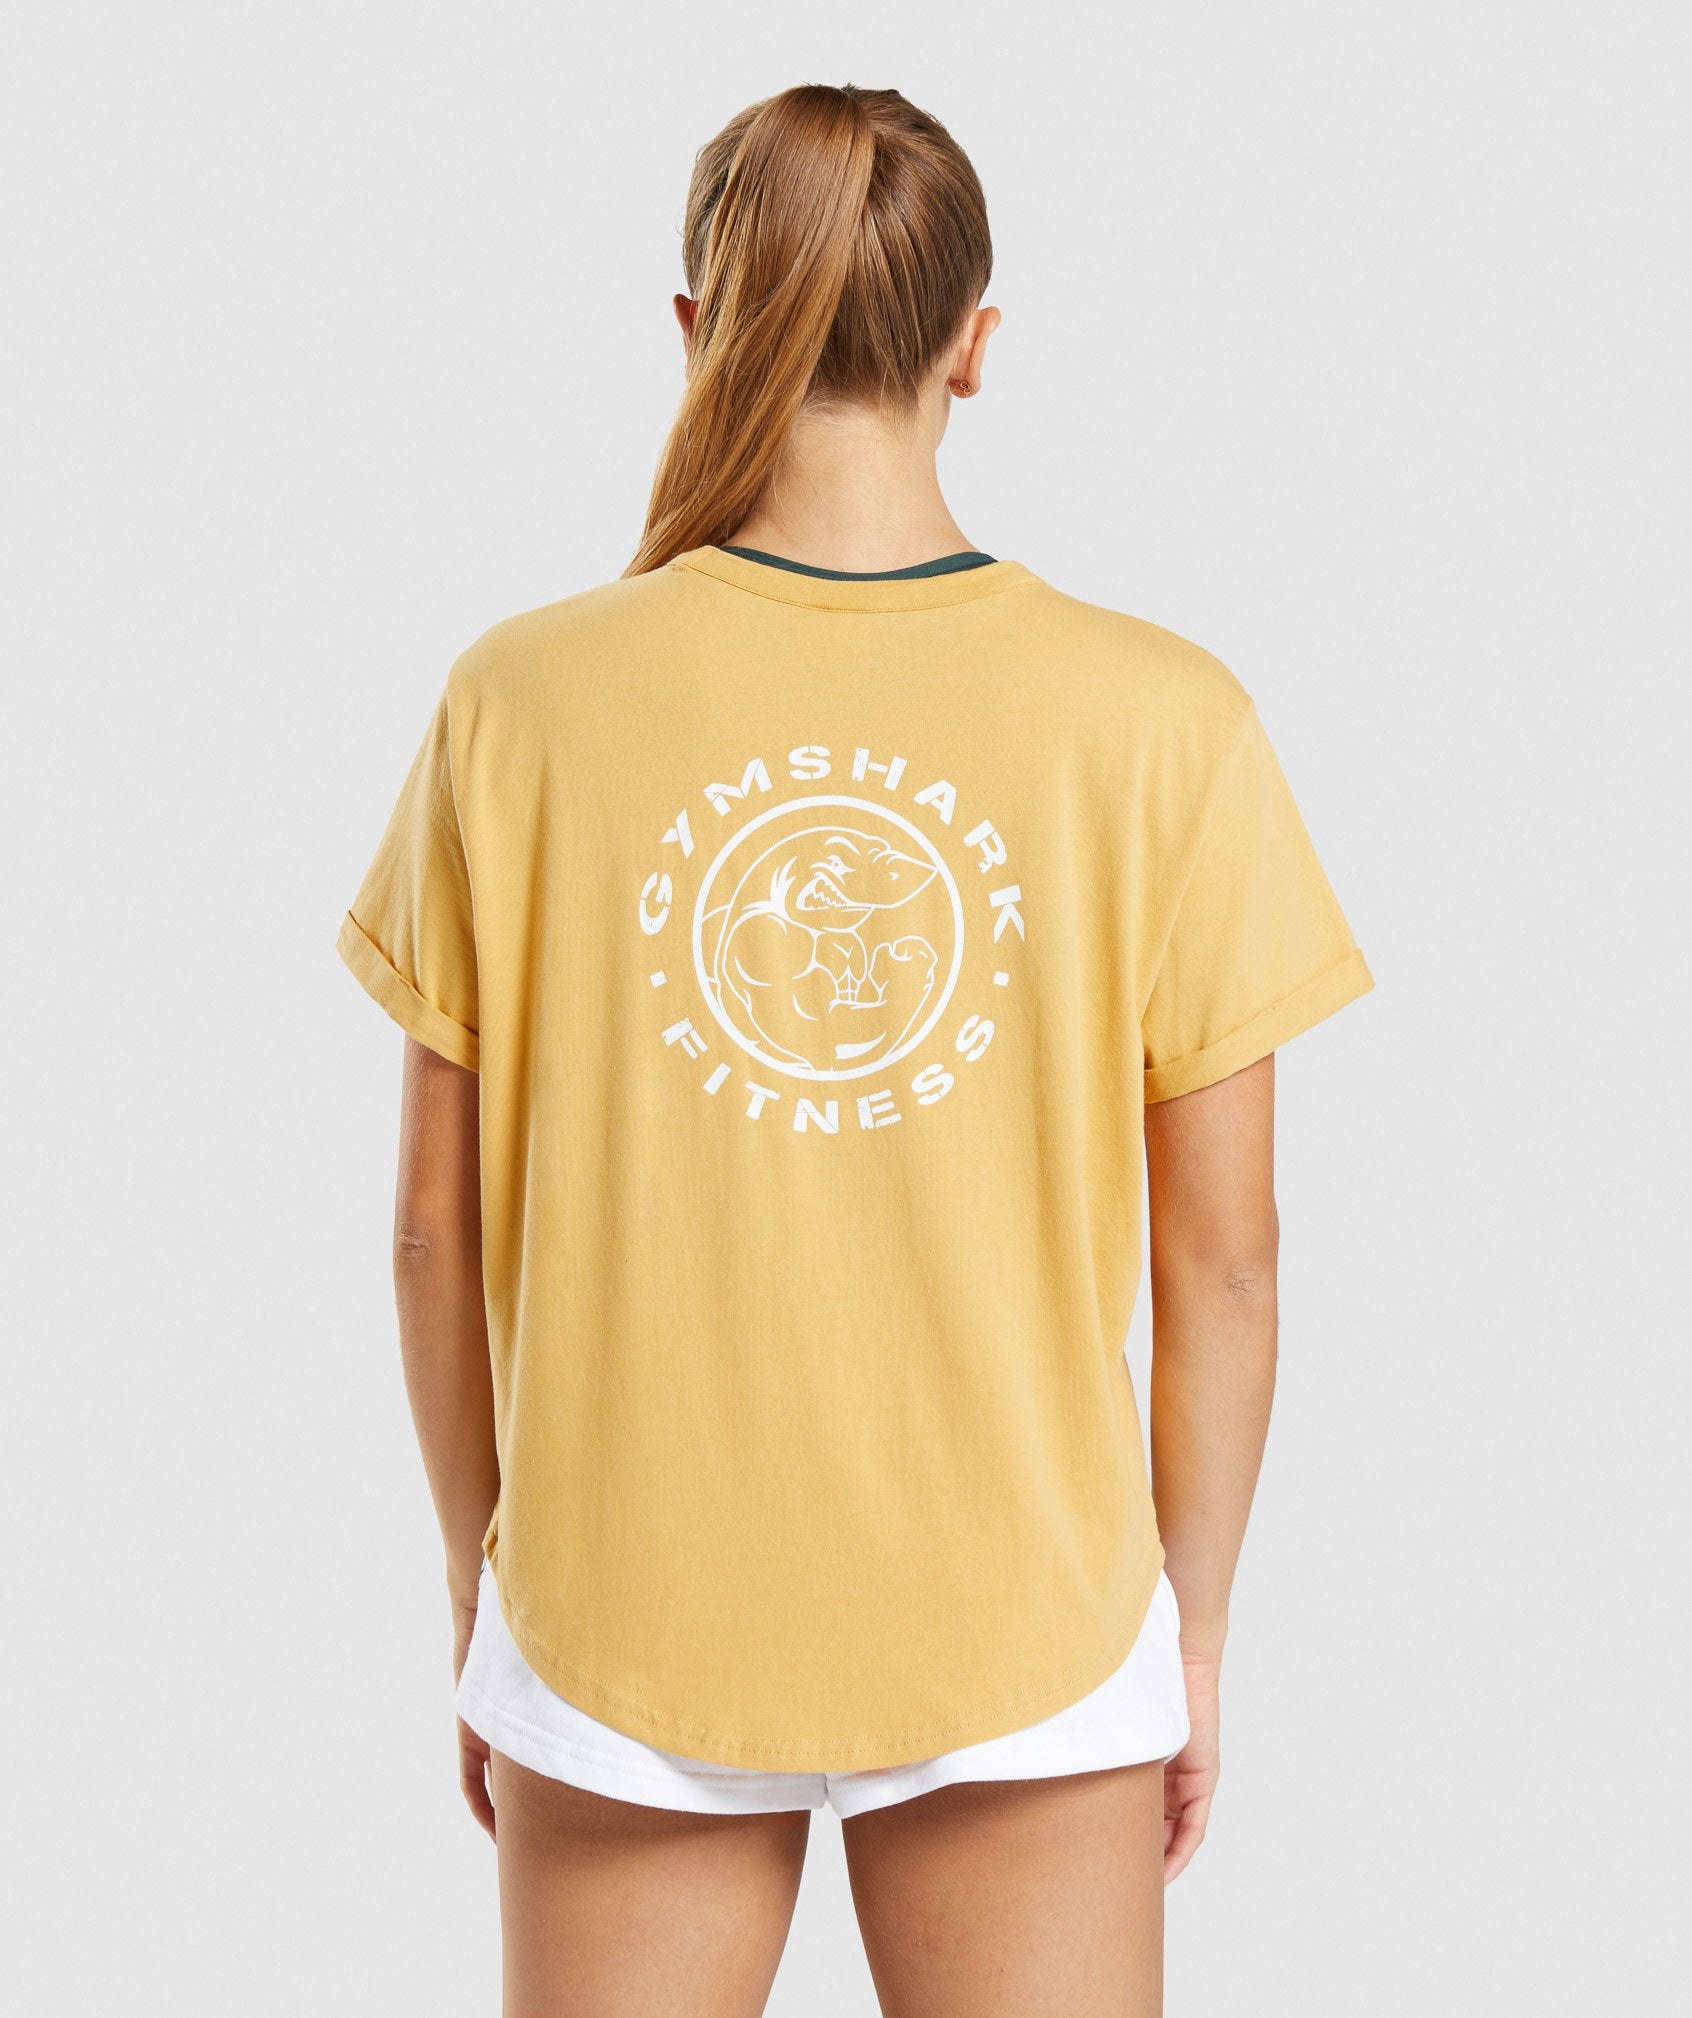 Legacy Graphic Tee in Yellow - view 2